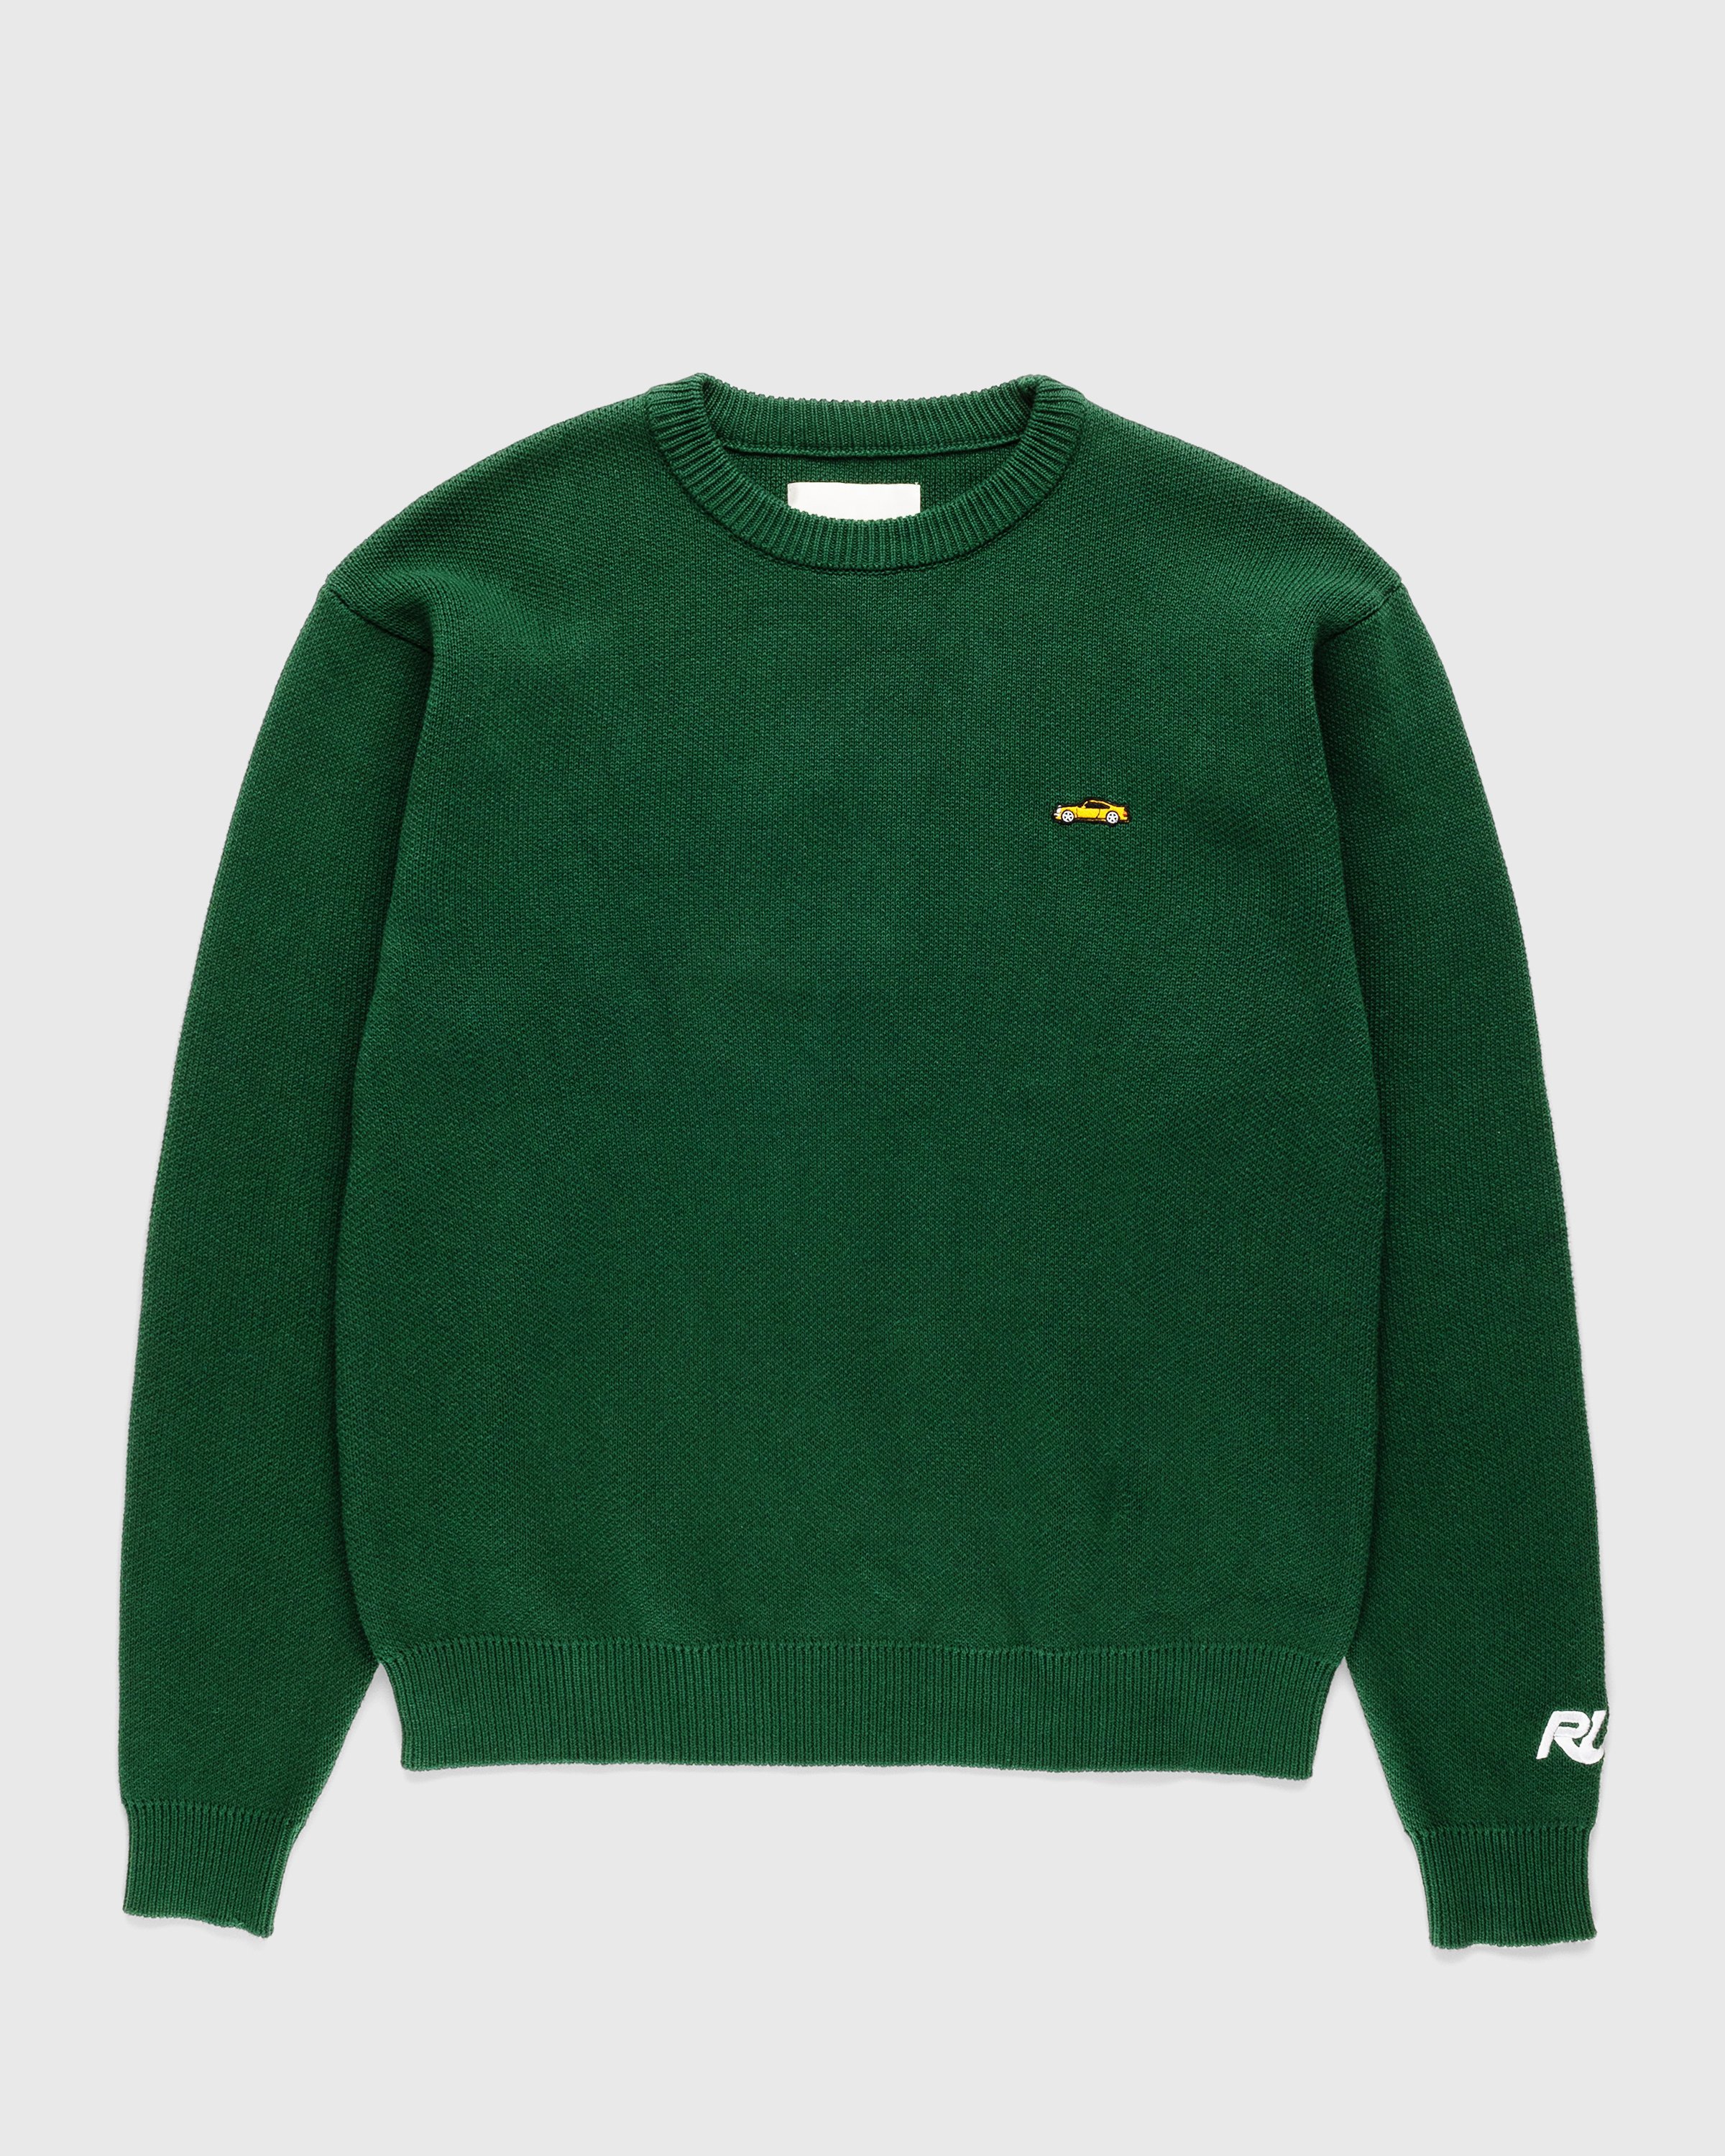 RUF x Highsnobiety - Knitted Crewneck Sweater Green - Clothing - Green - Image 1